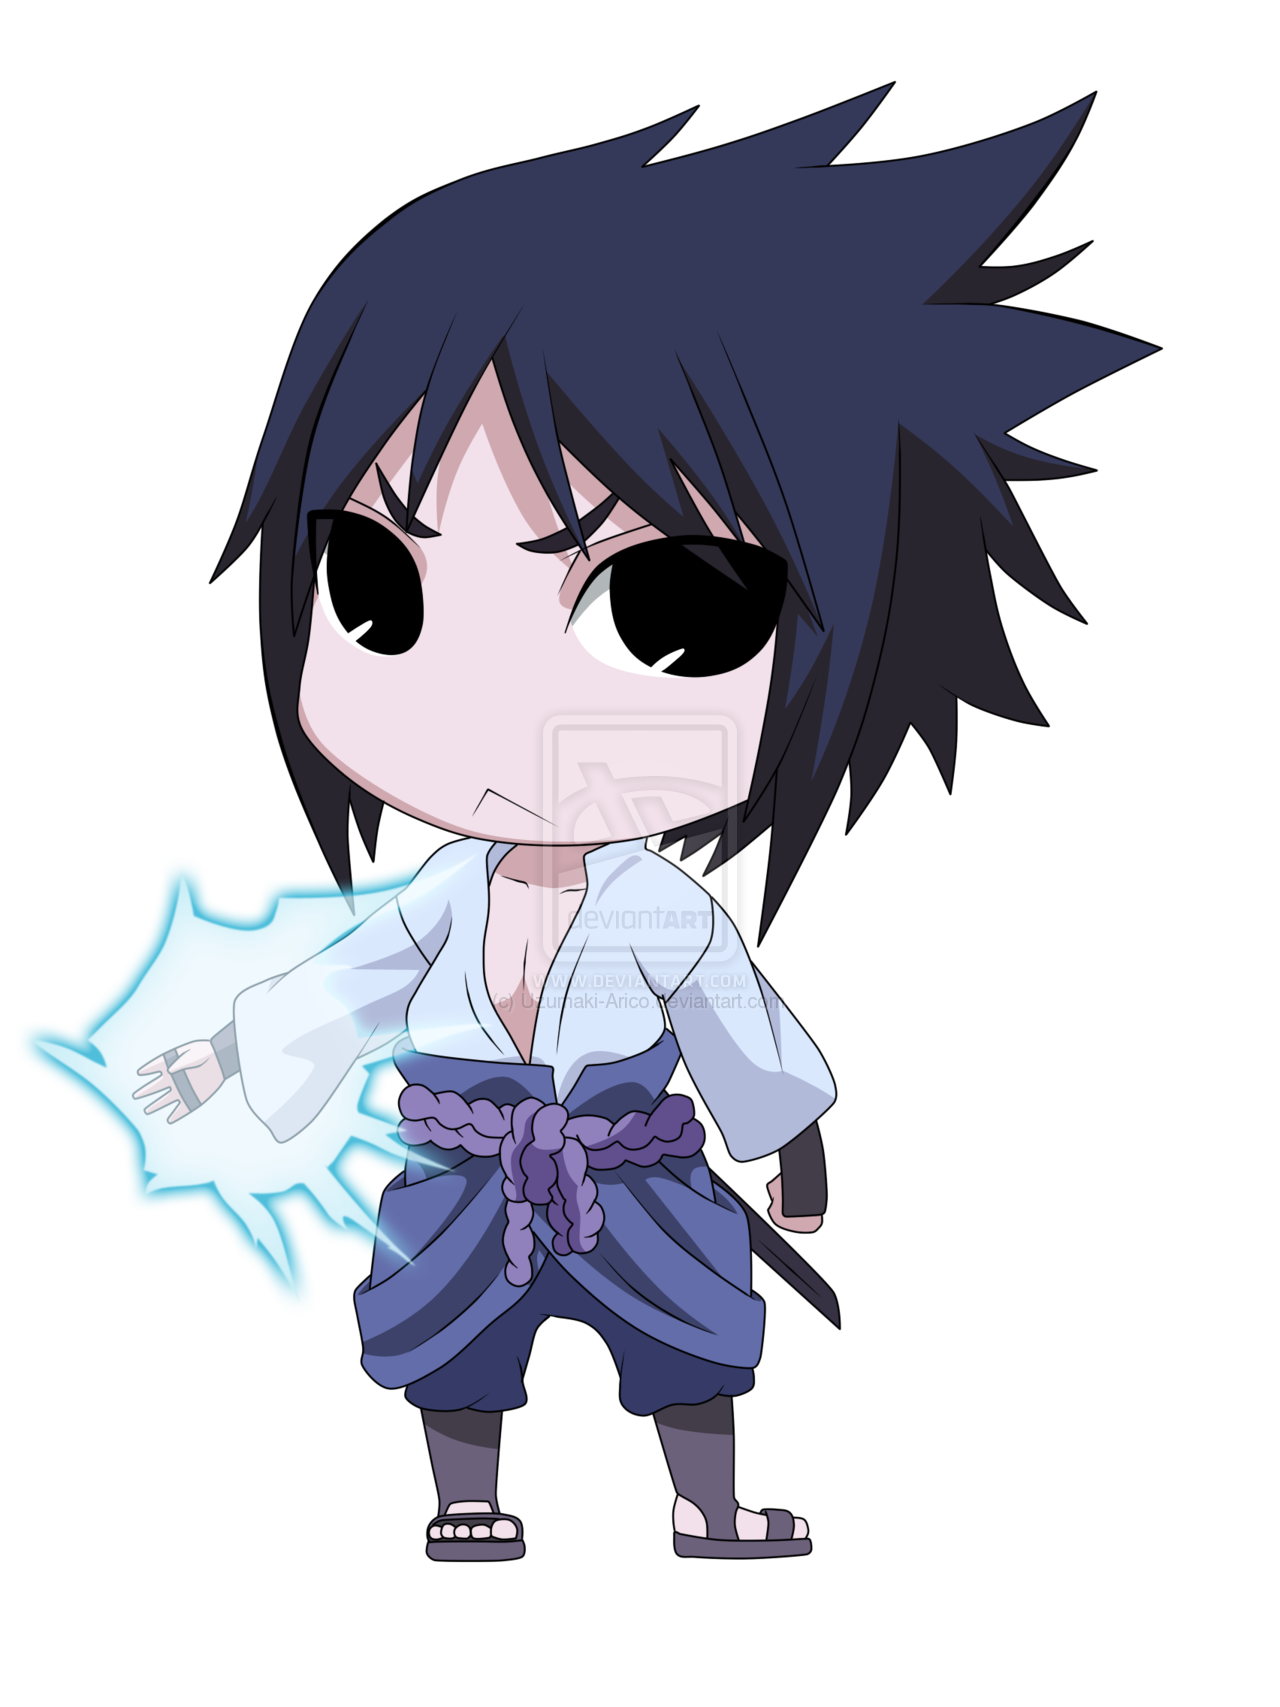 While Sasuke is far from being a favorite of mine, it's ... - Sasuke Forms